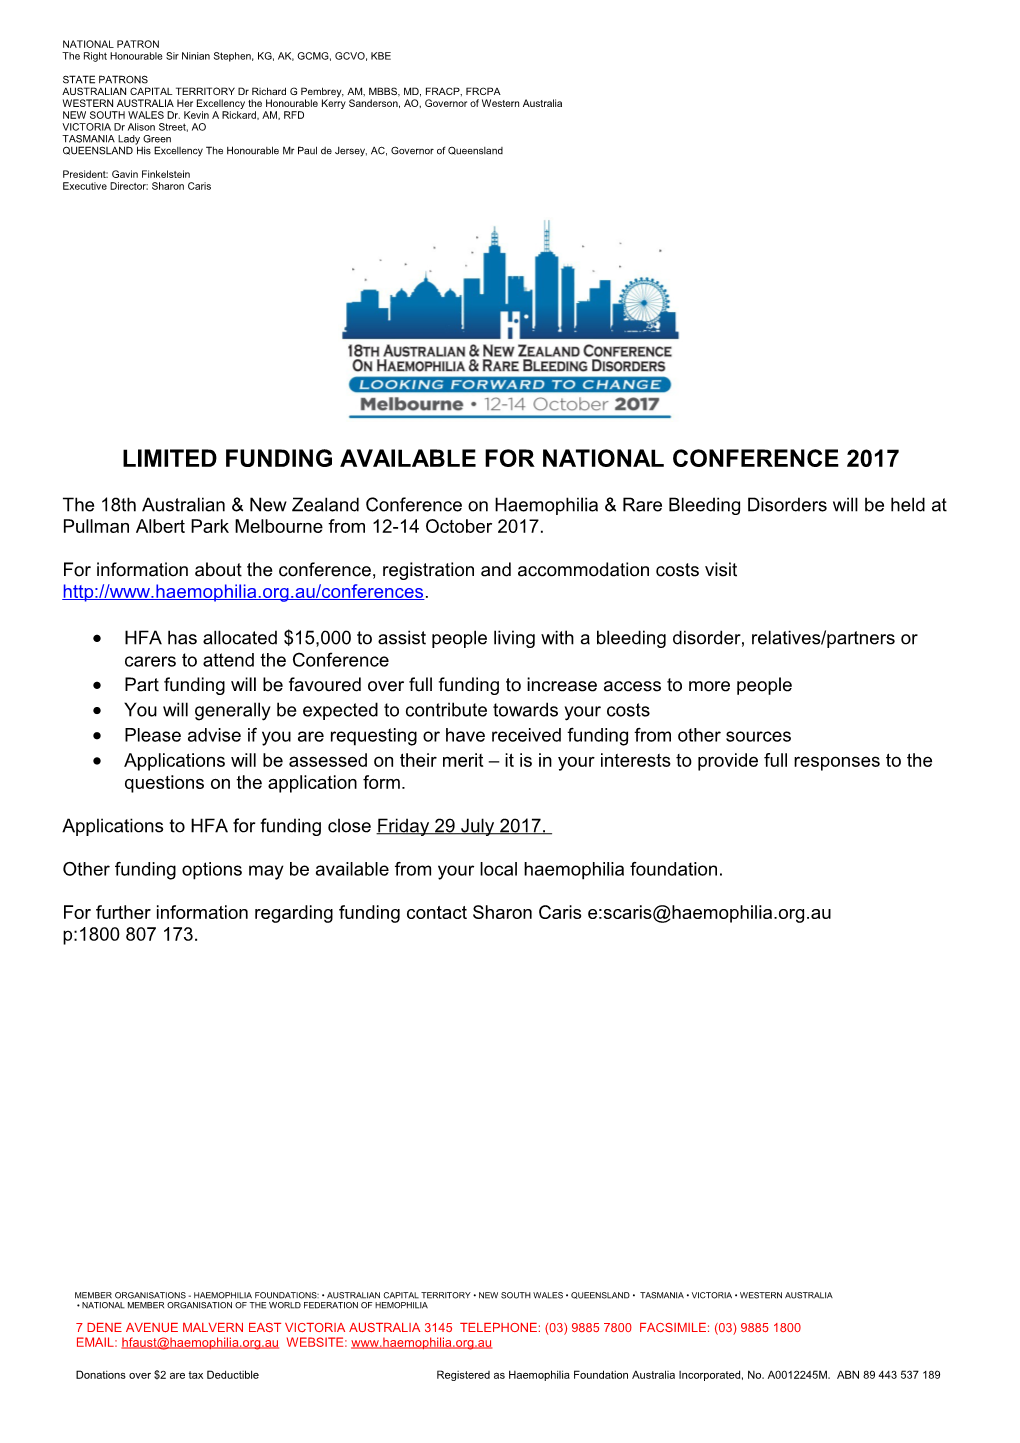 Limited Funding Available for National Conference 2017